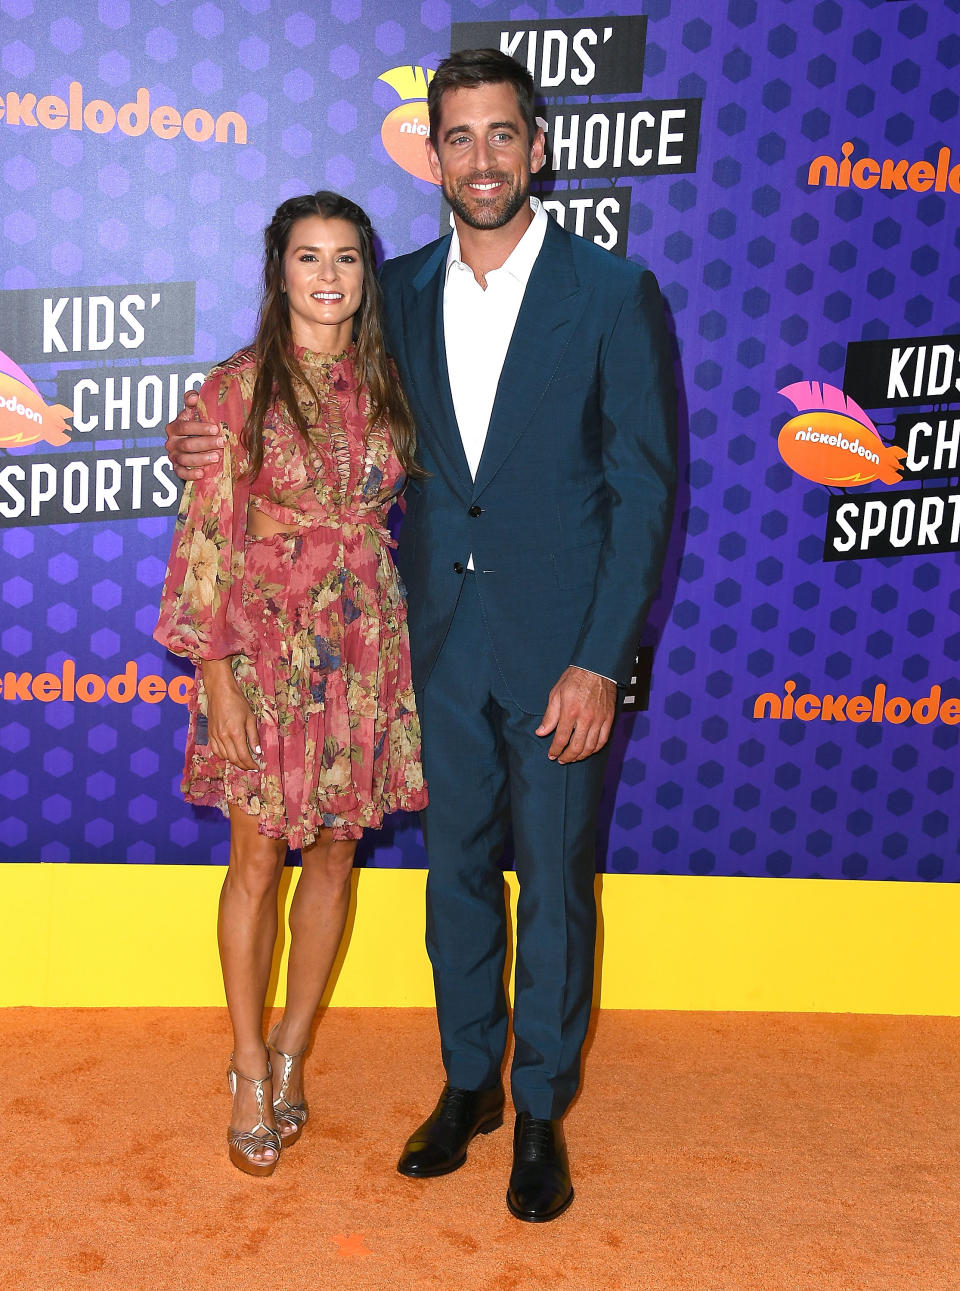 Two people smiling, wearing semi-formal attire, at a Nickelodeon event